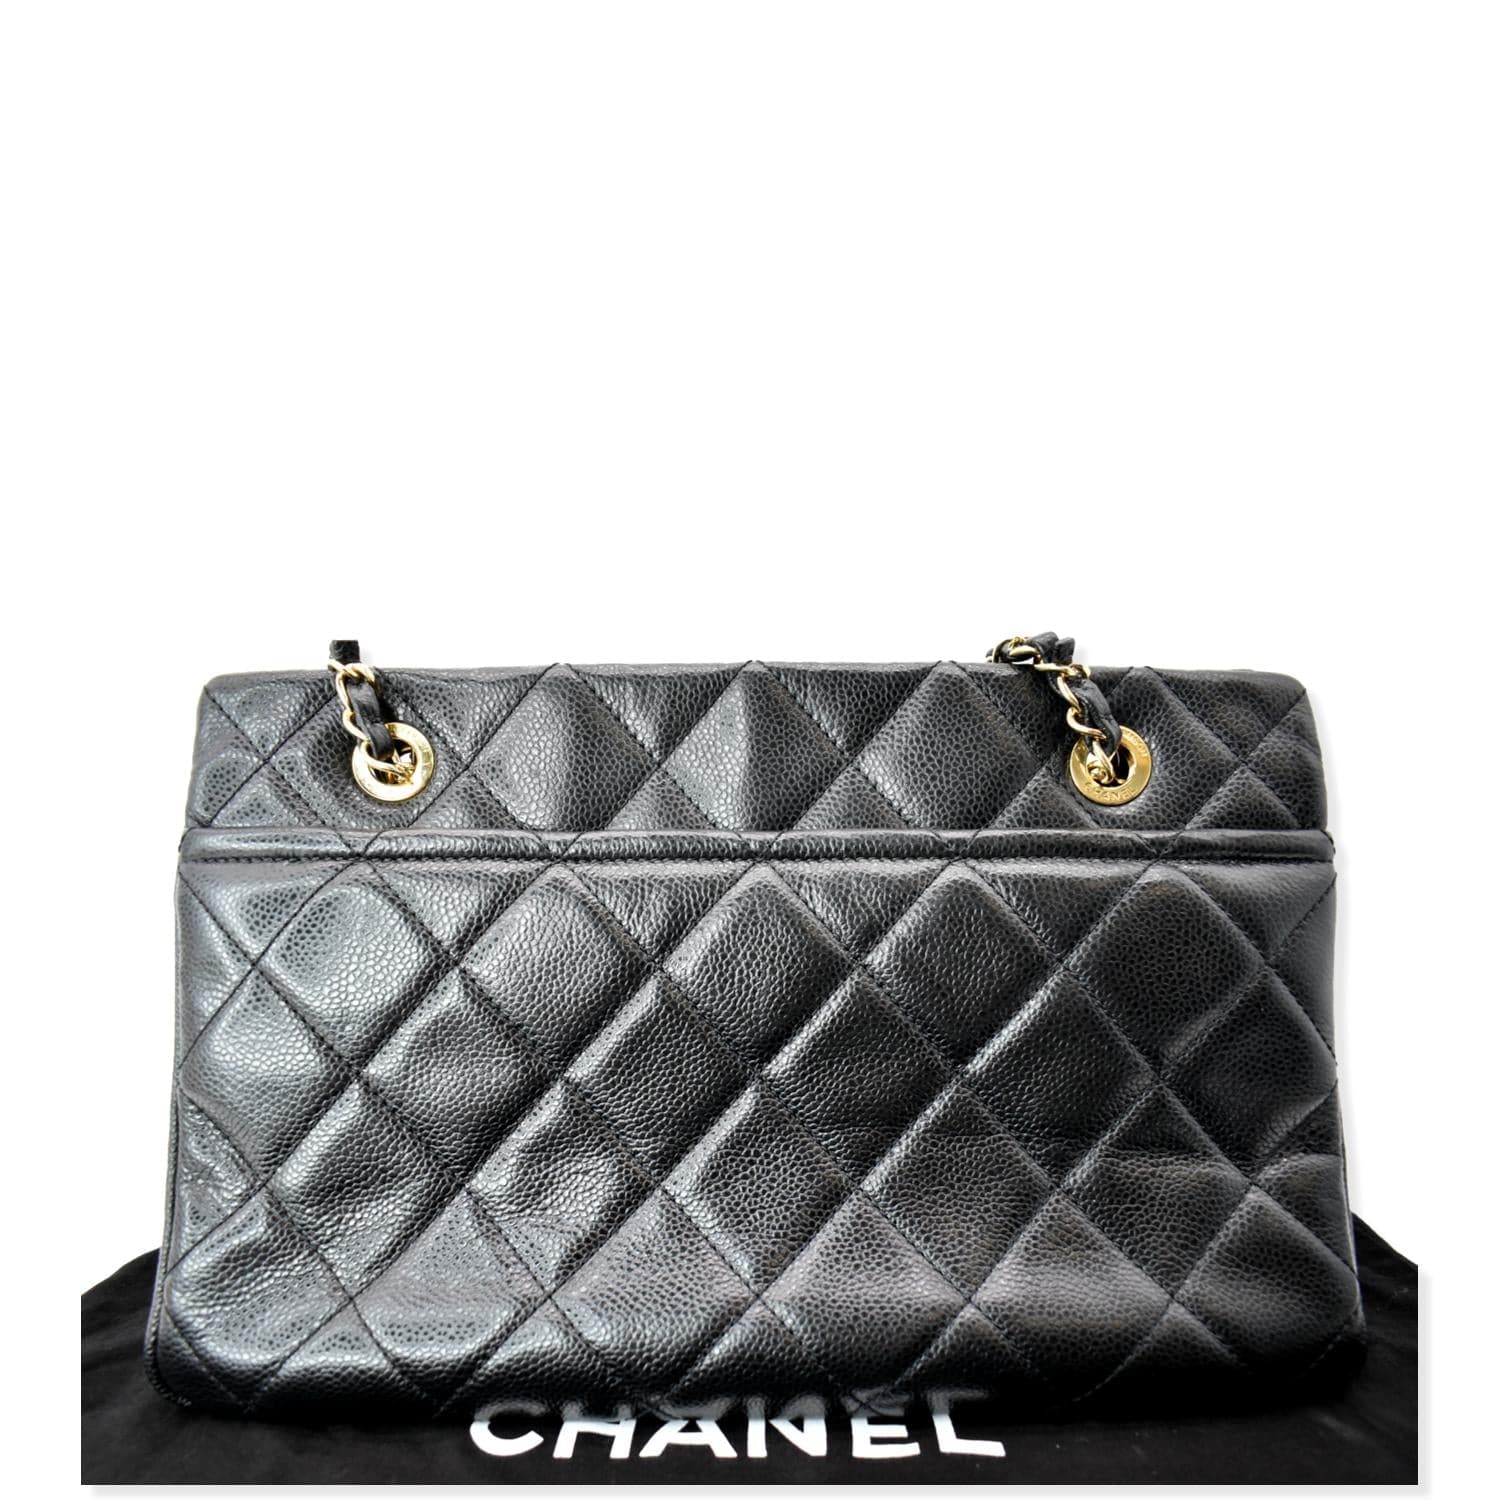 Past auction: Chanel soft leather quilted purse